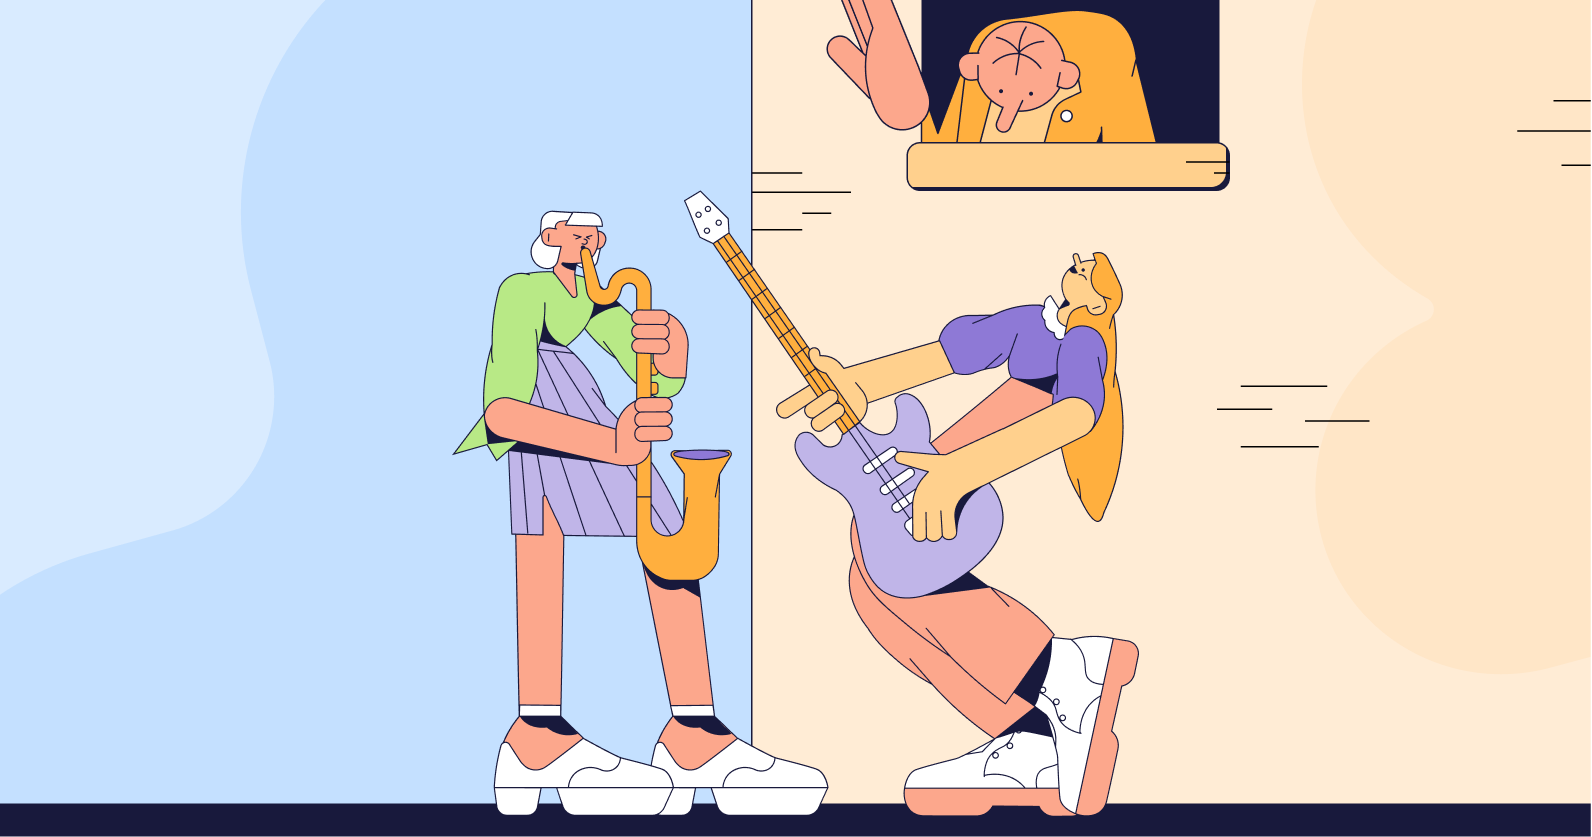 Illustration of people in a street playing a guitar and a saxophone, with another person looking out a window.